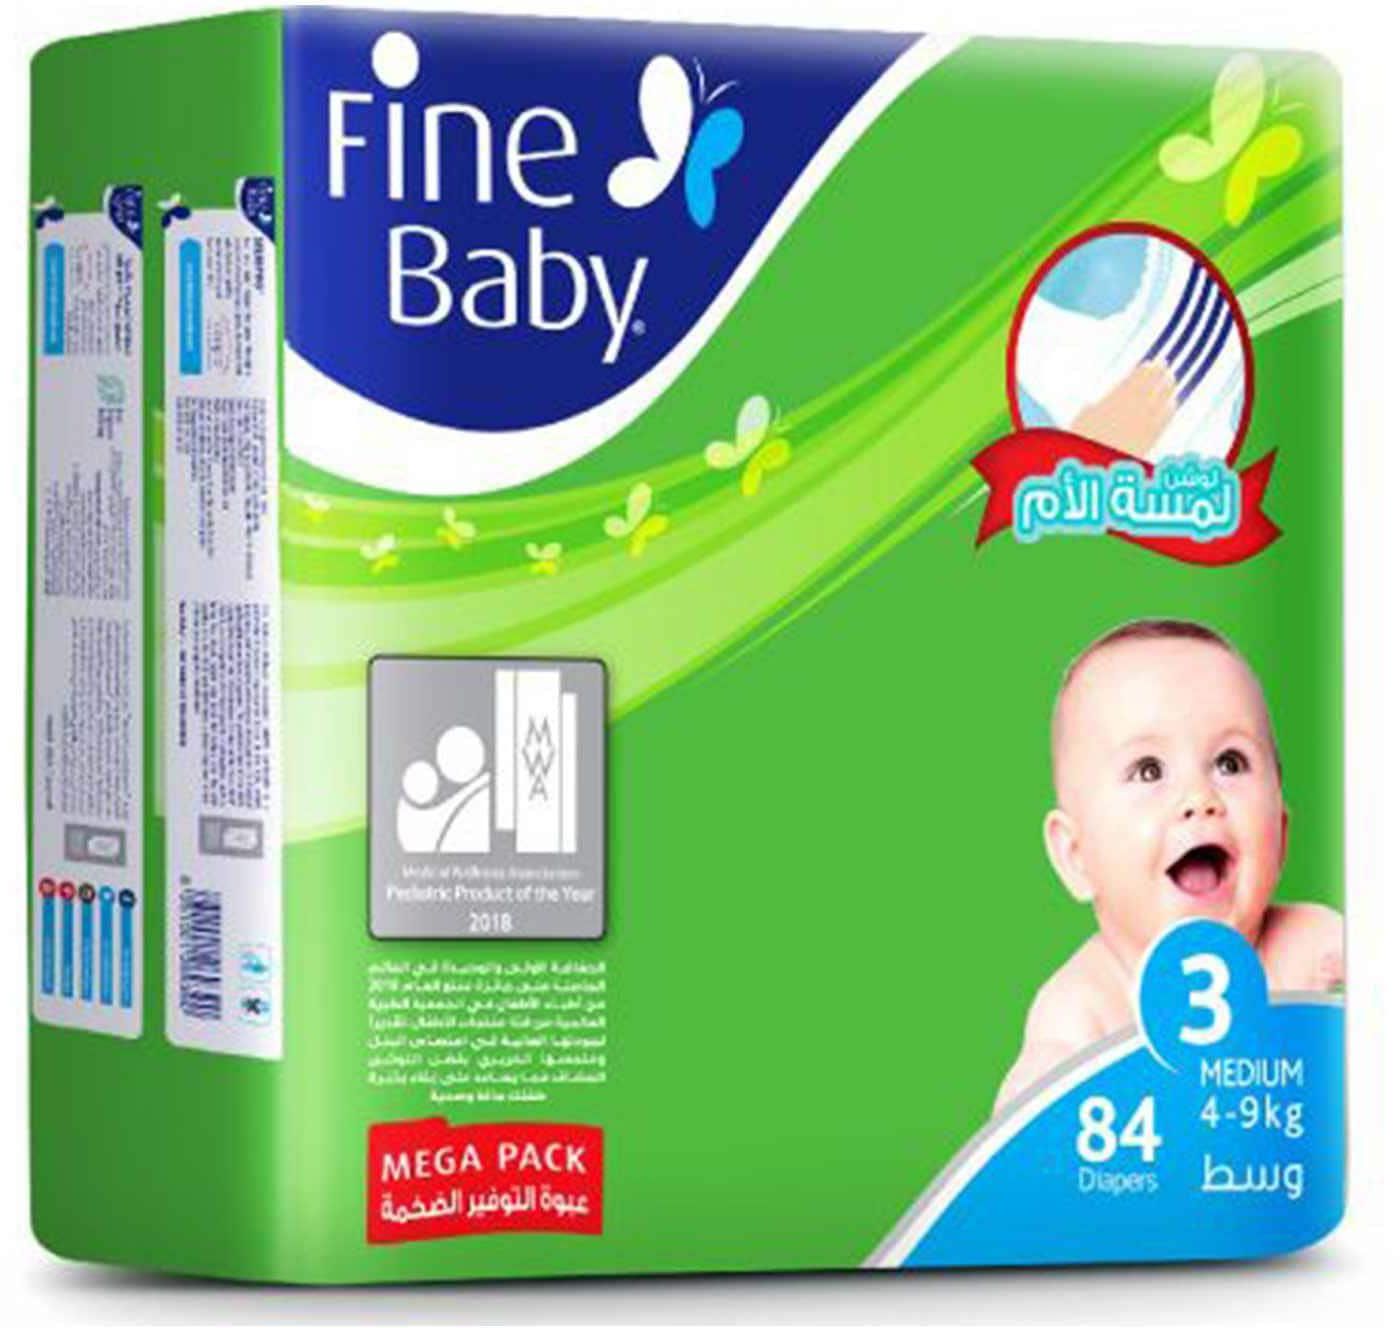 Fine baby size 3 mega pack 84 diapers